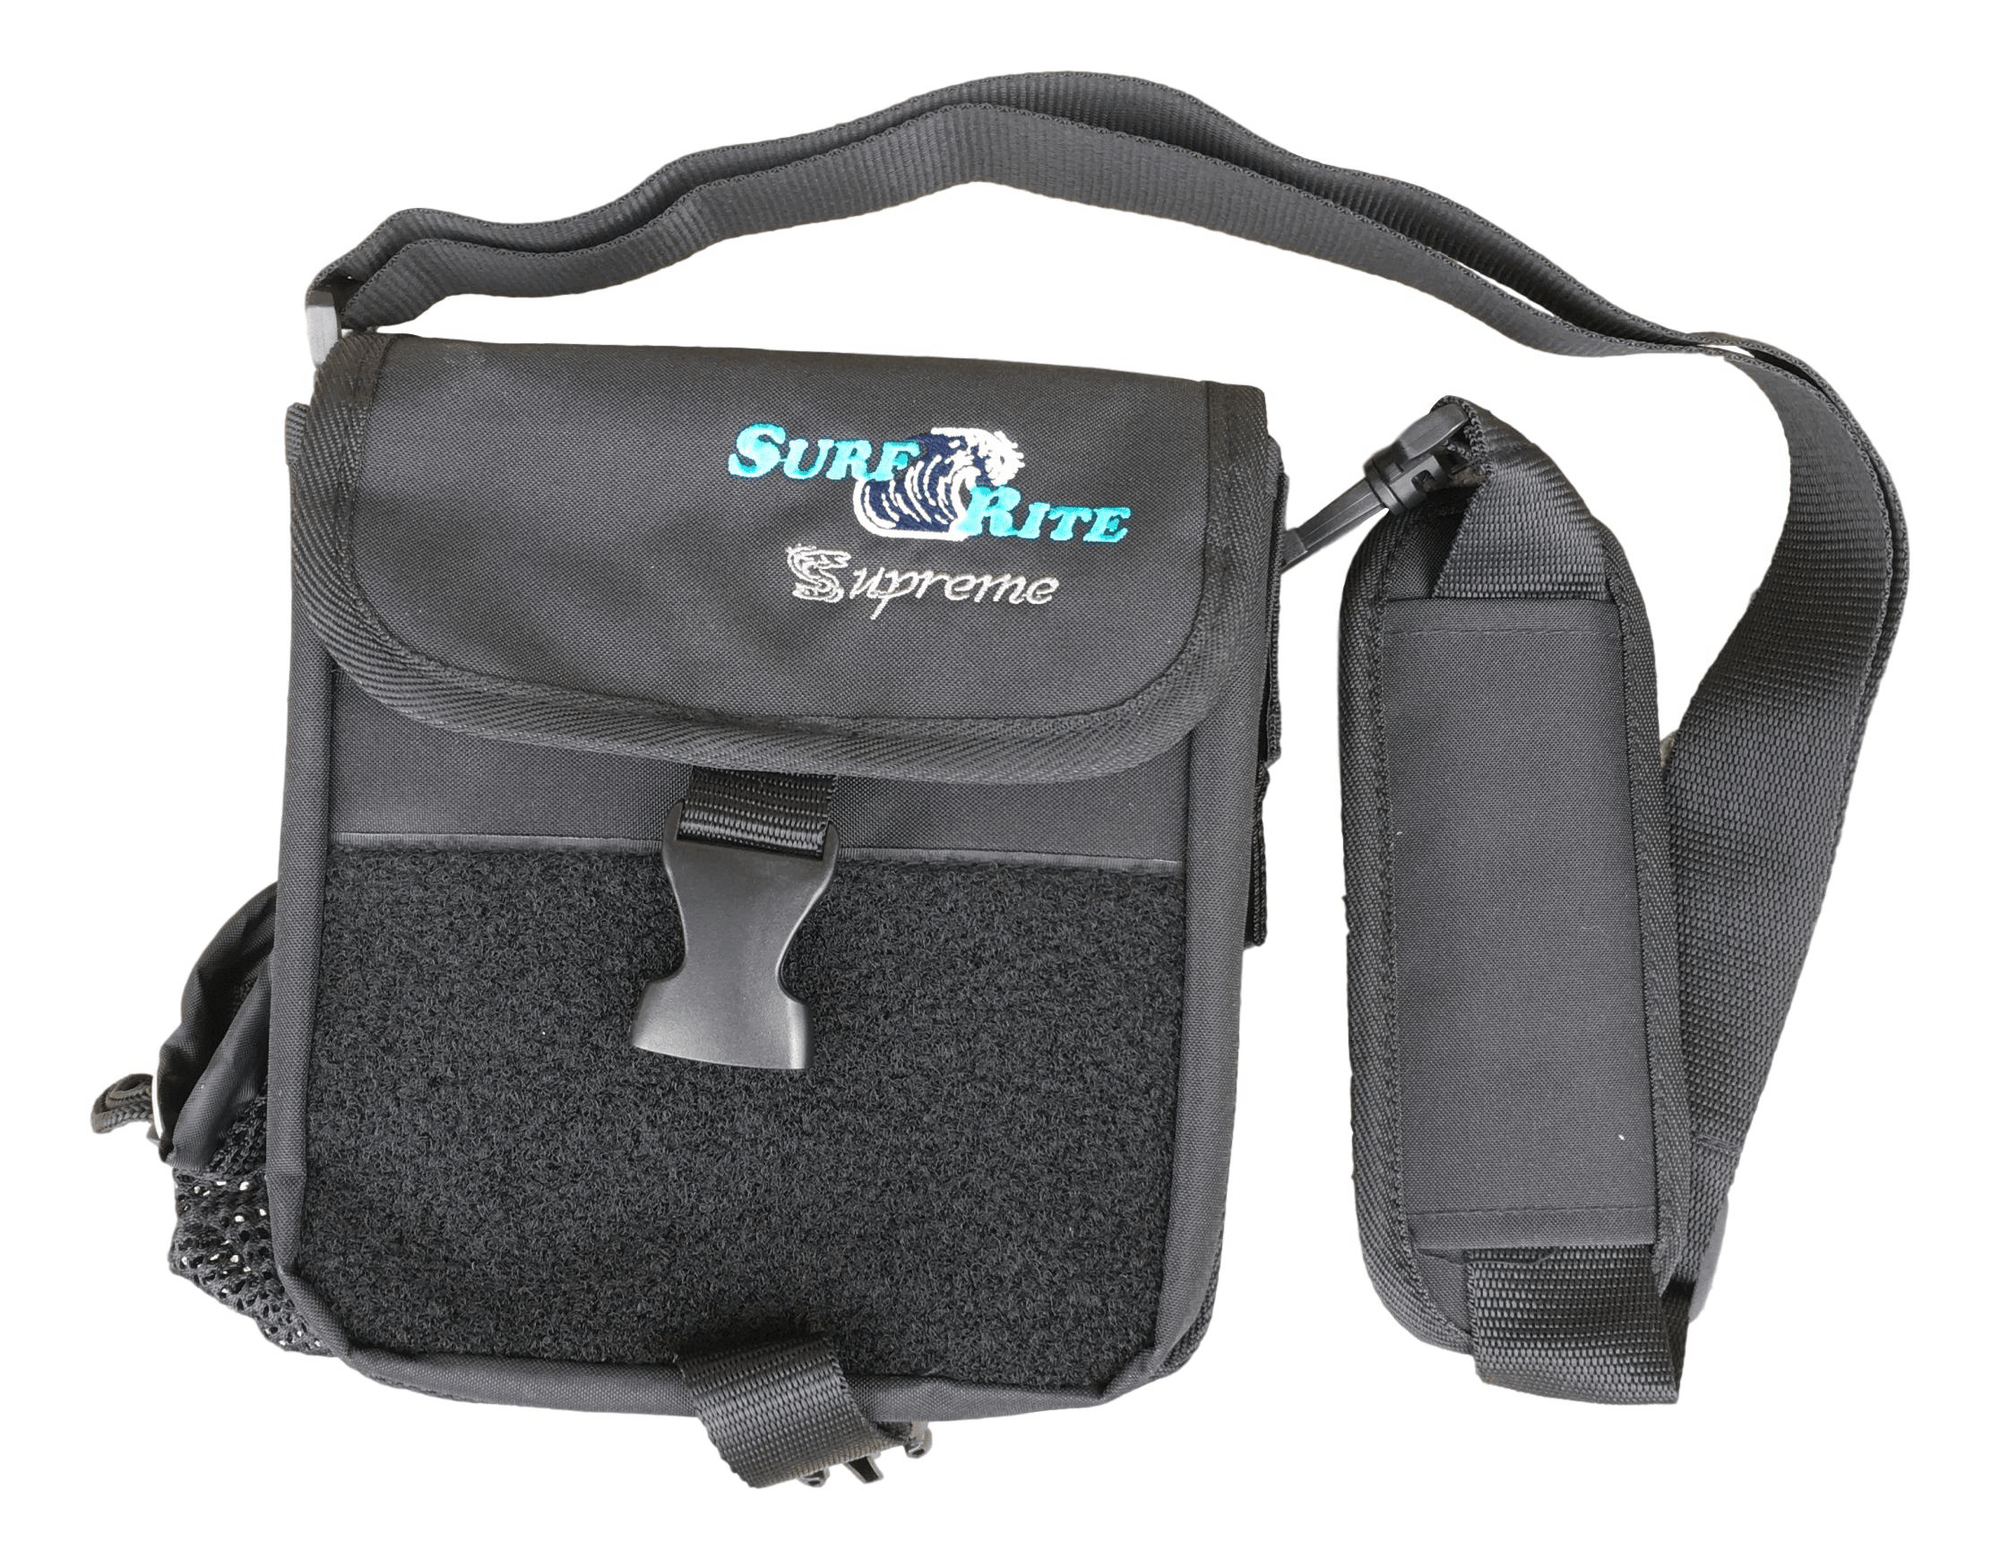 Fishing Tackle Surf Bags for sale, Shop with Afterpay